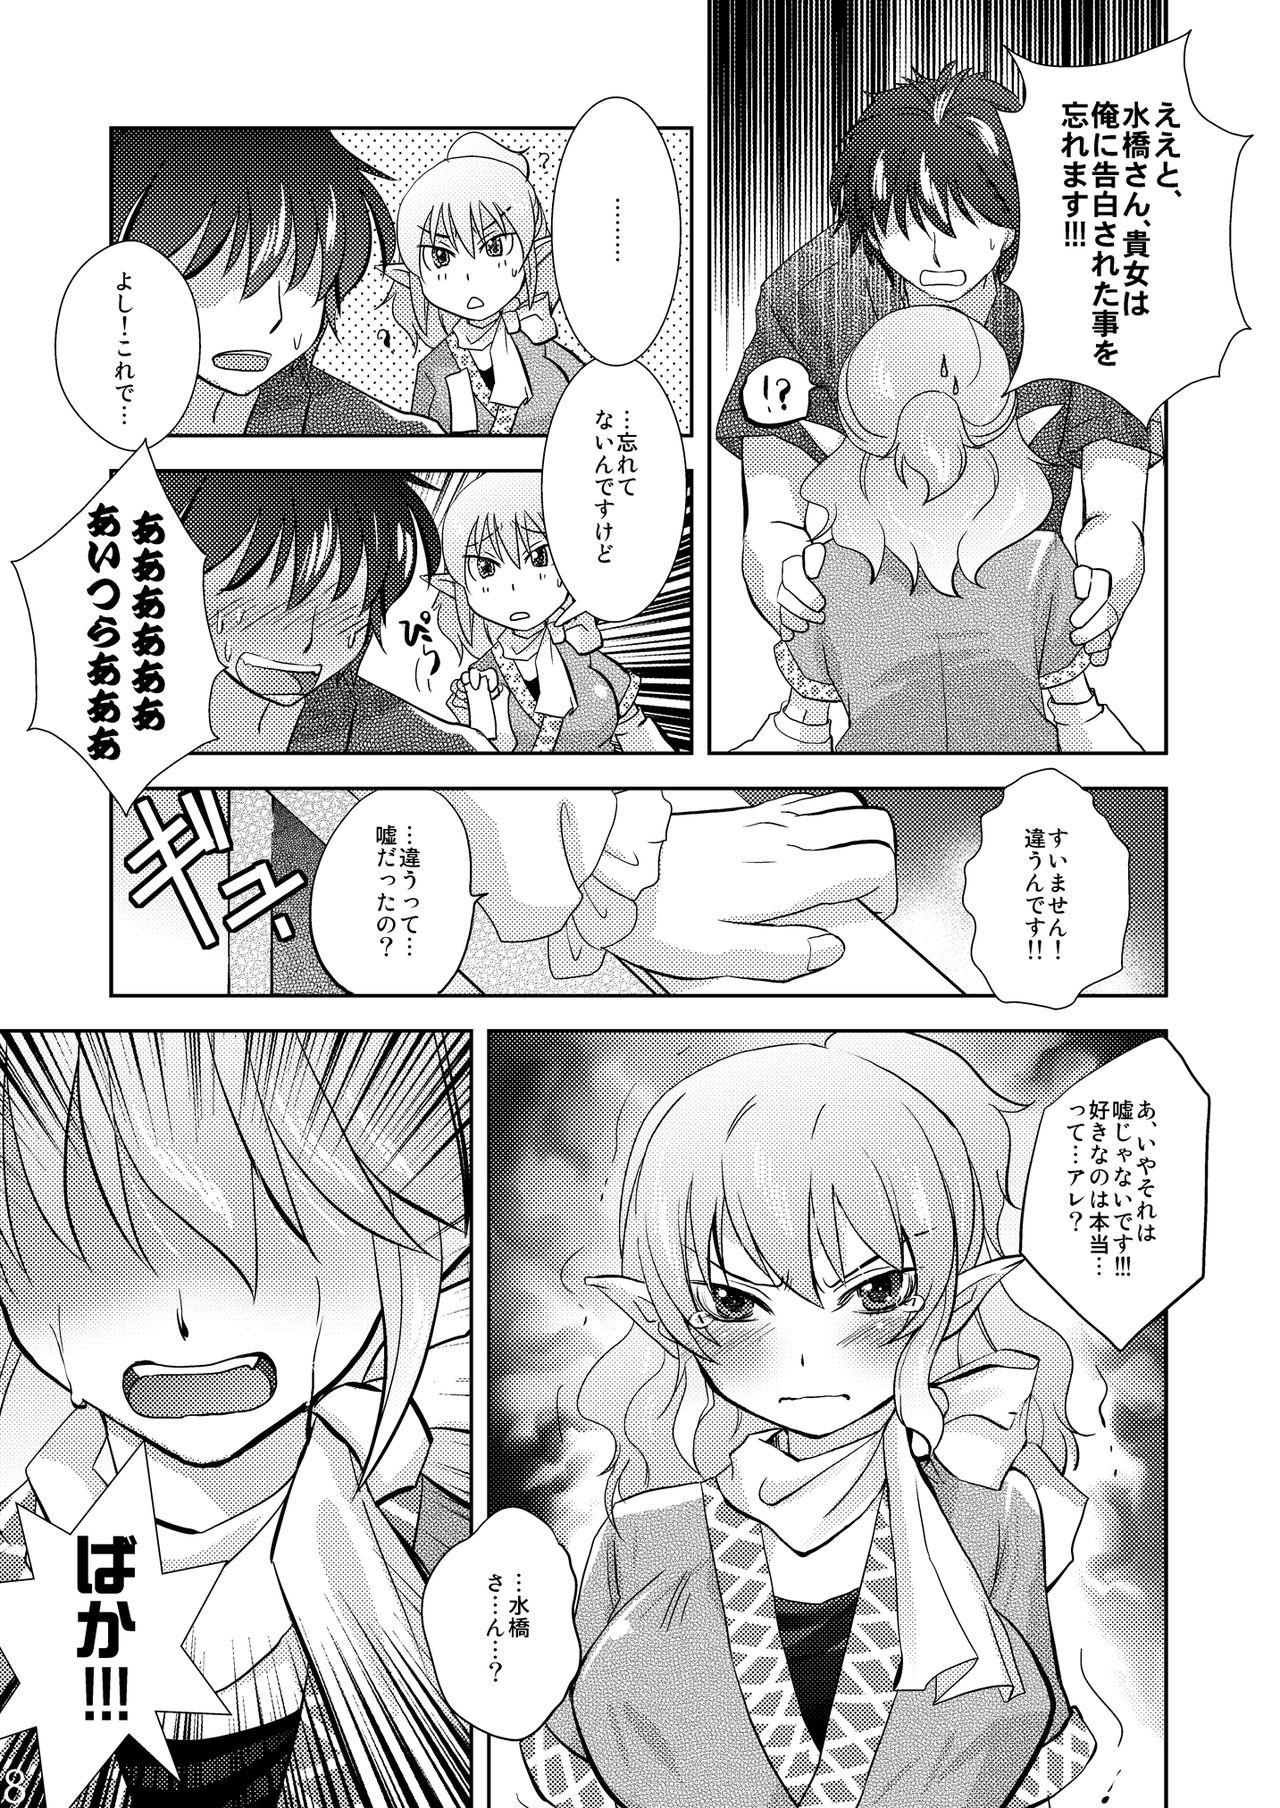 Flashing Opparusui - Touhou project Fingers - Page 8